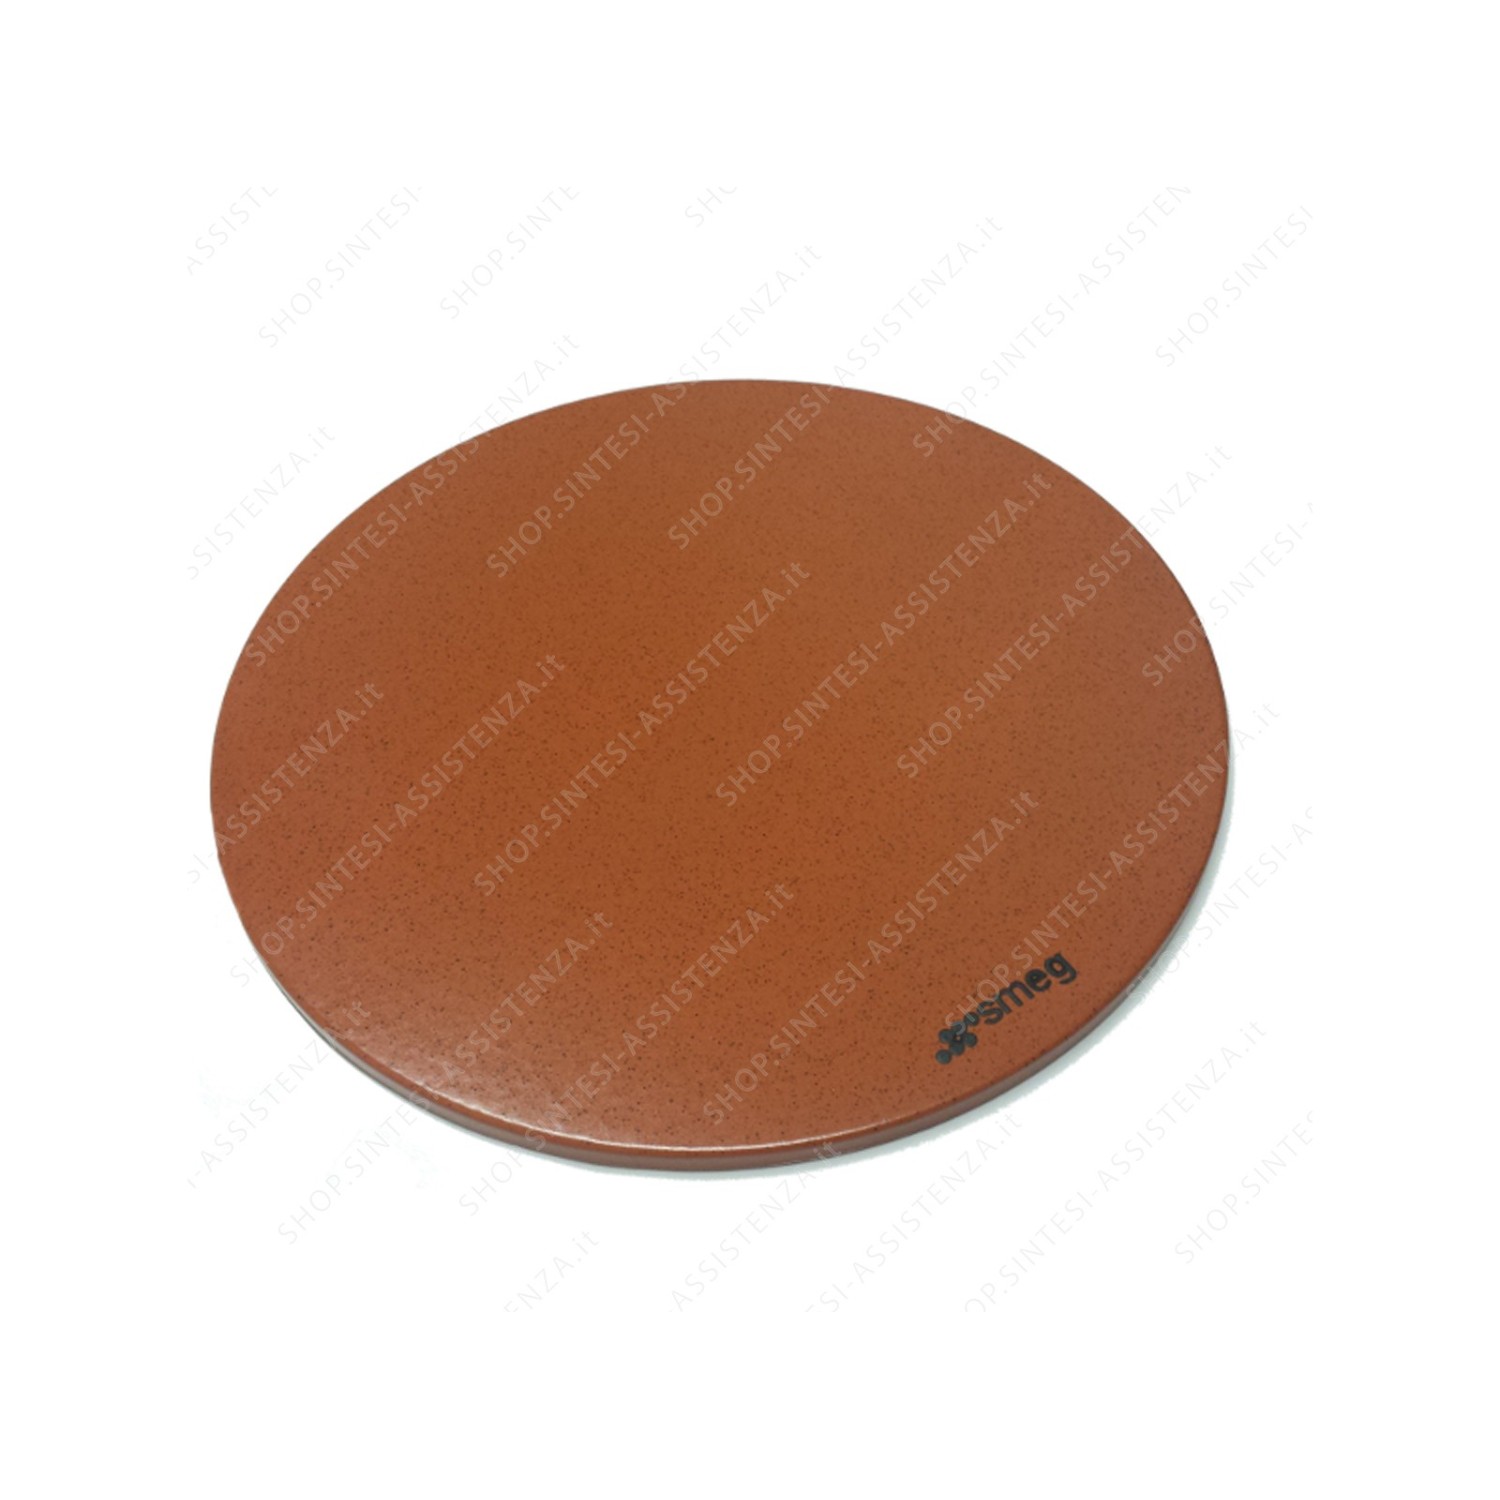 ROUND REFRACTORY STONE PLATE FOR SMEG PIZZA OVEN - 305690433